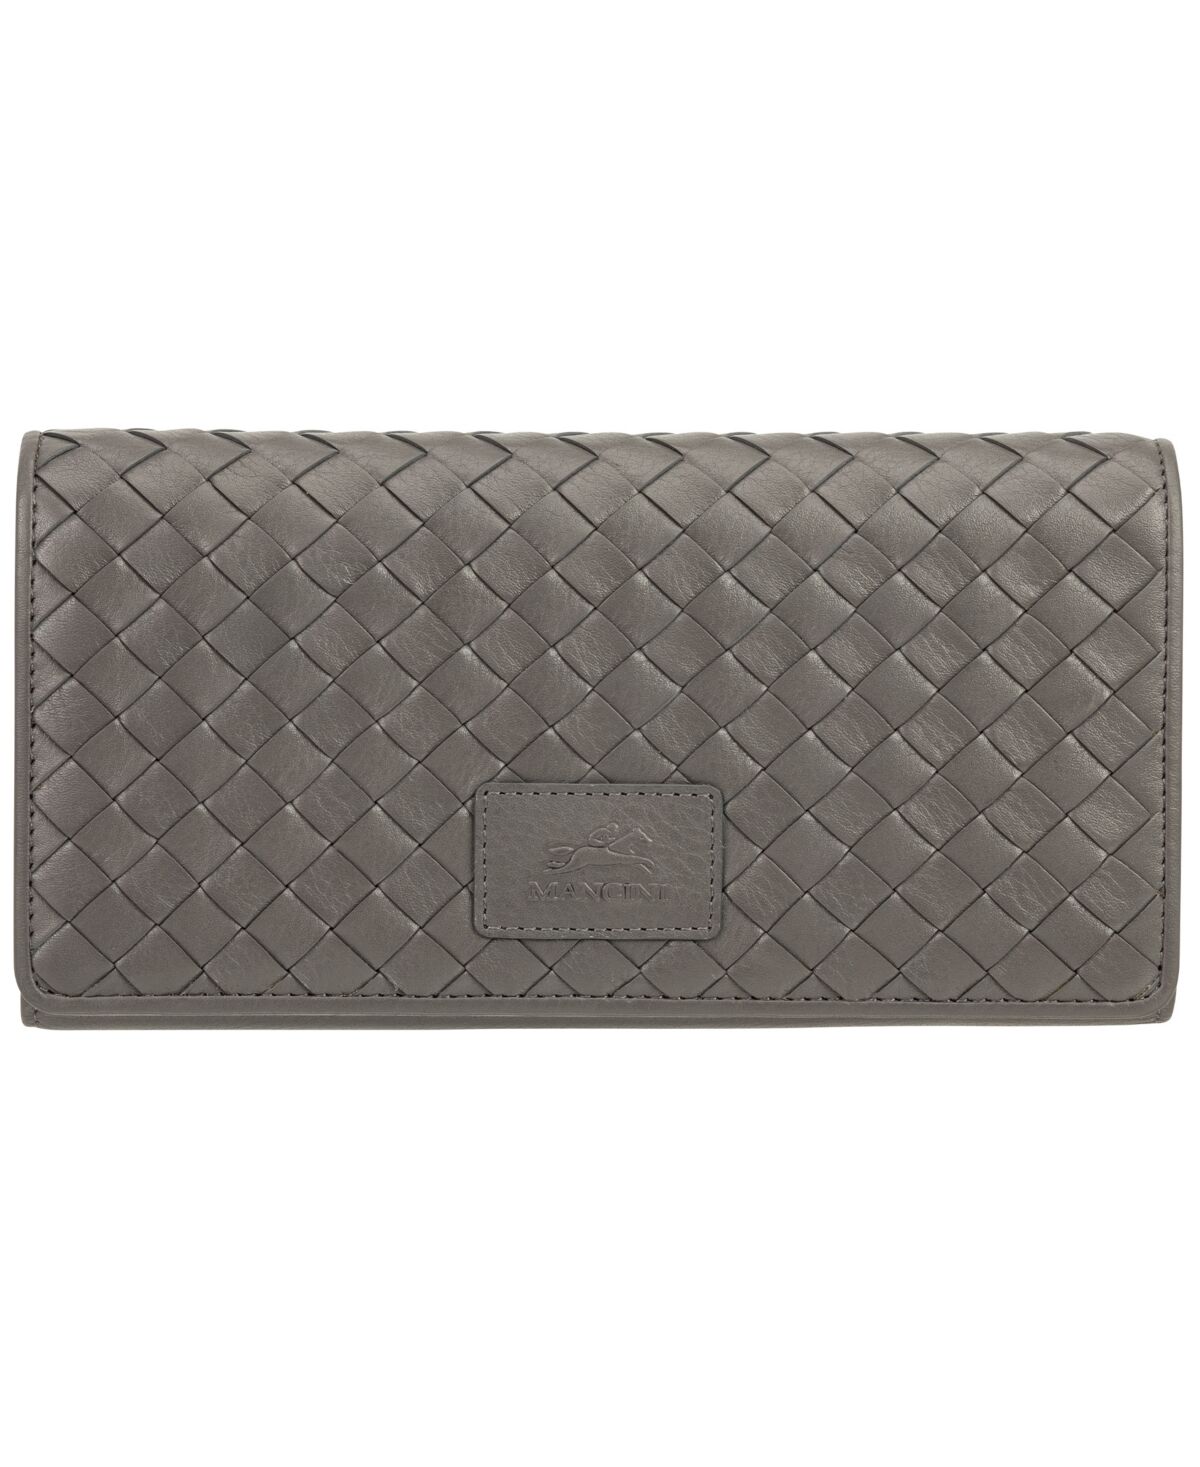 Mancini Women's Basket Weave Collection Rfid Secure Trifold Wallet - Gray